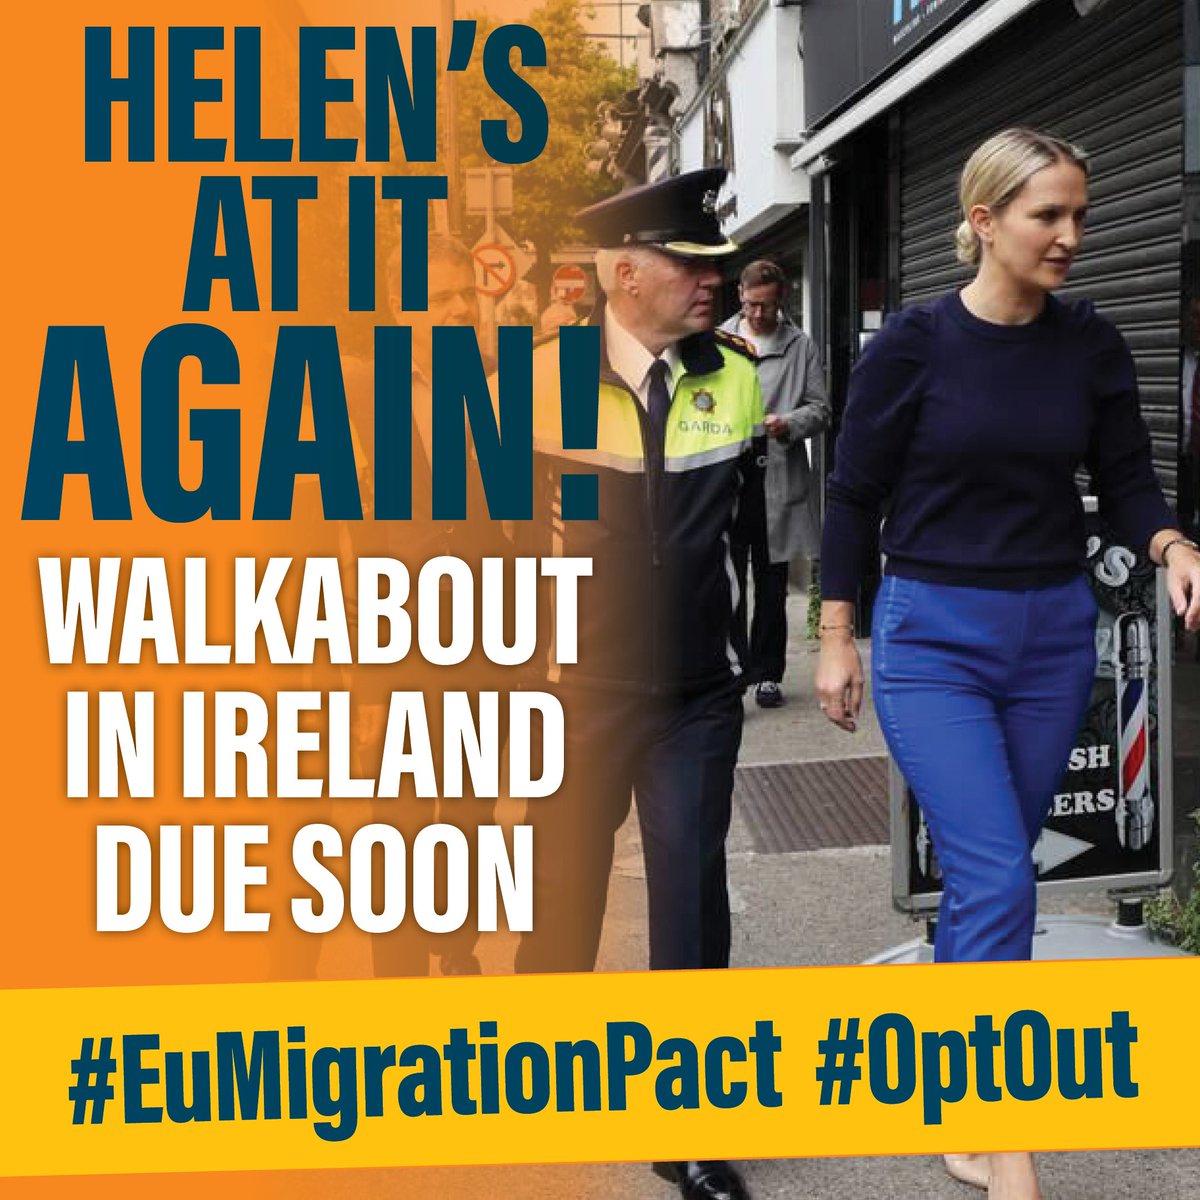 I'm out on the doors canvassing every night for the upcoming local elections. People are so fed up with what's happening to our country. As our population rises, crime rises. People do not feel safe anymore. The #EUMigrationPact will lead to more chaos and crime. We must